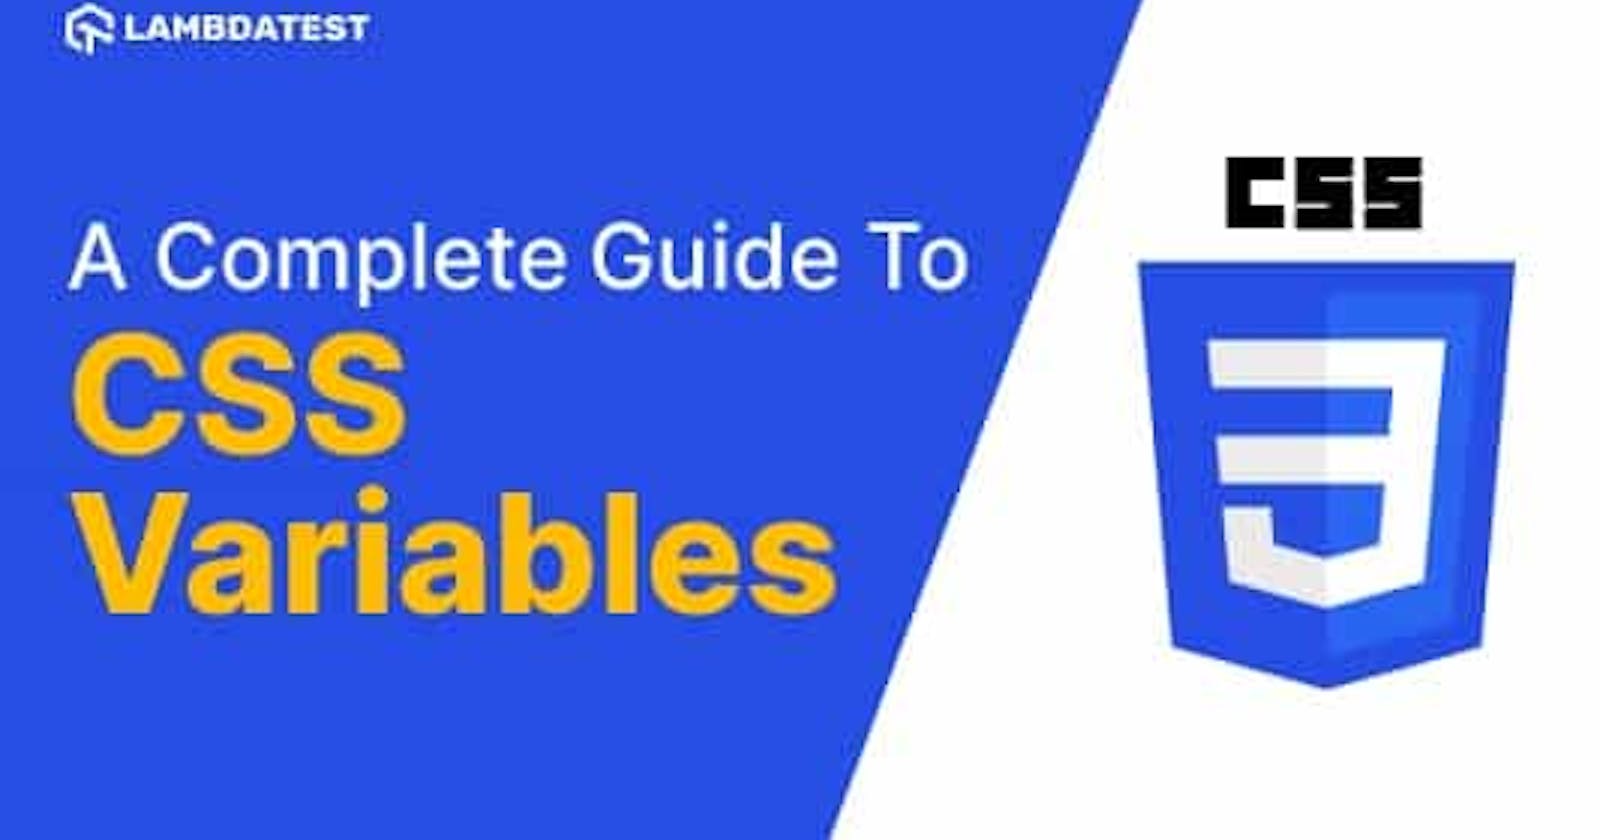 A Complete Guide To CSS Variables [With Examples]